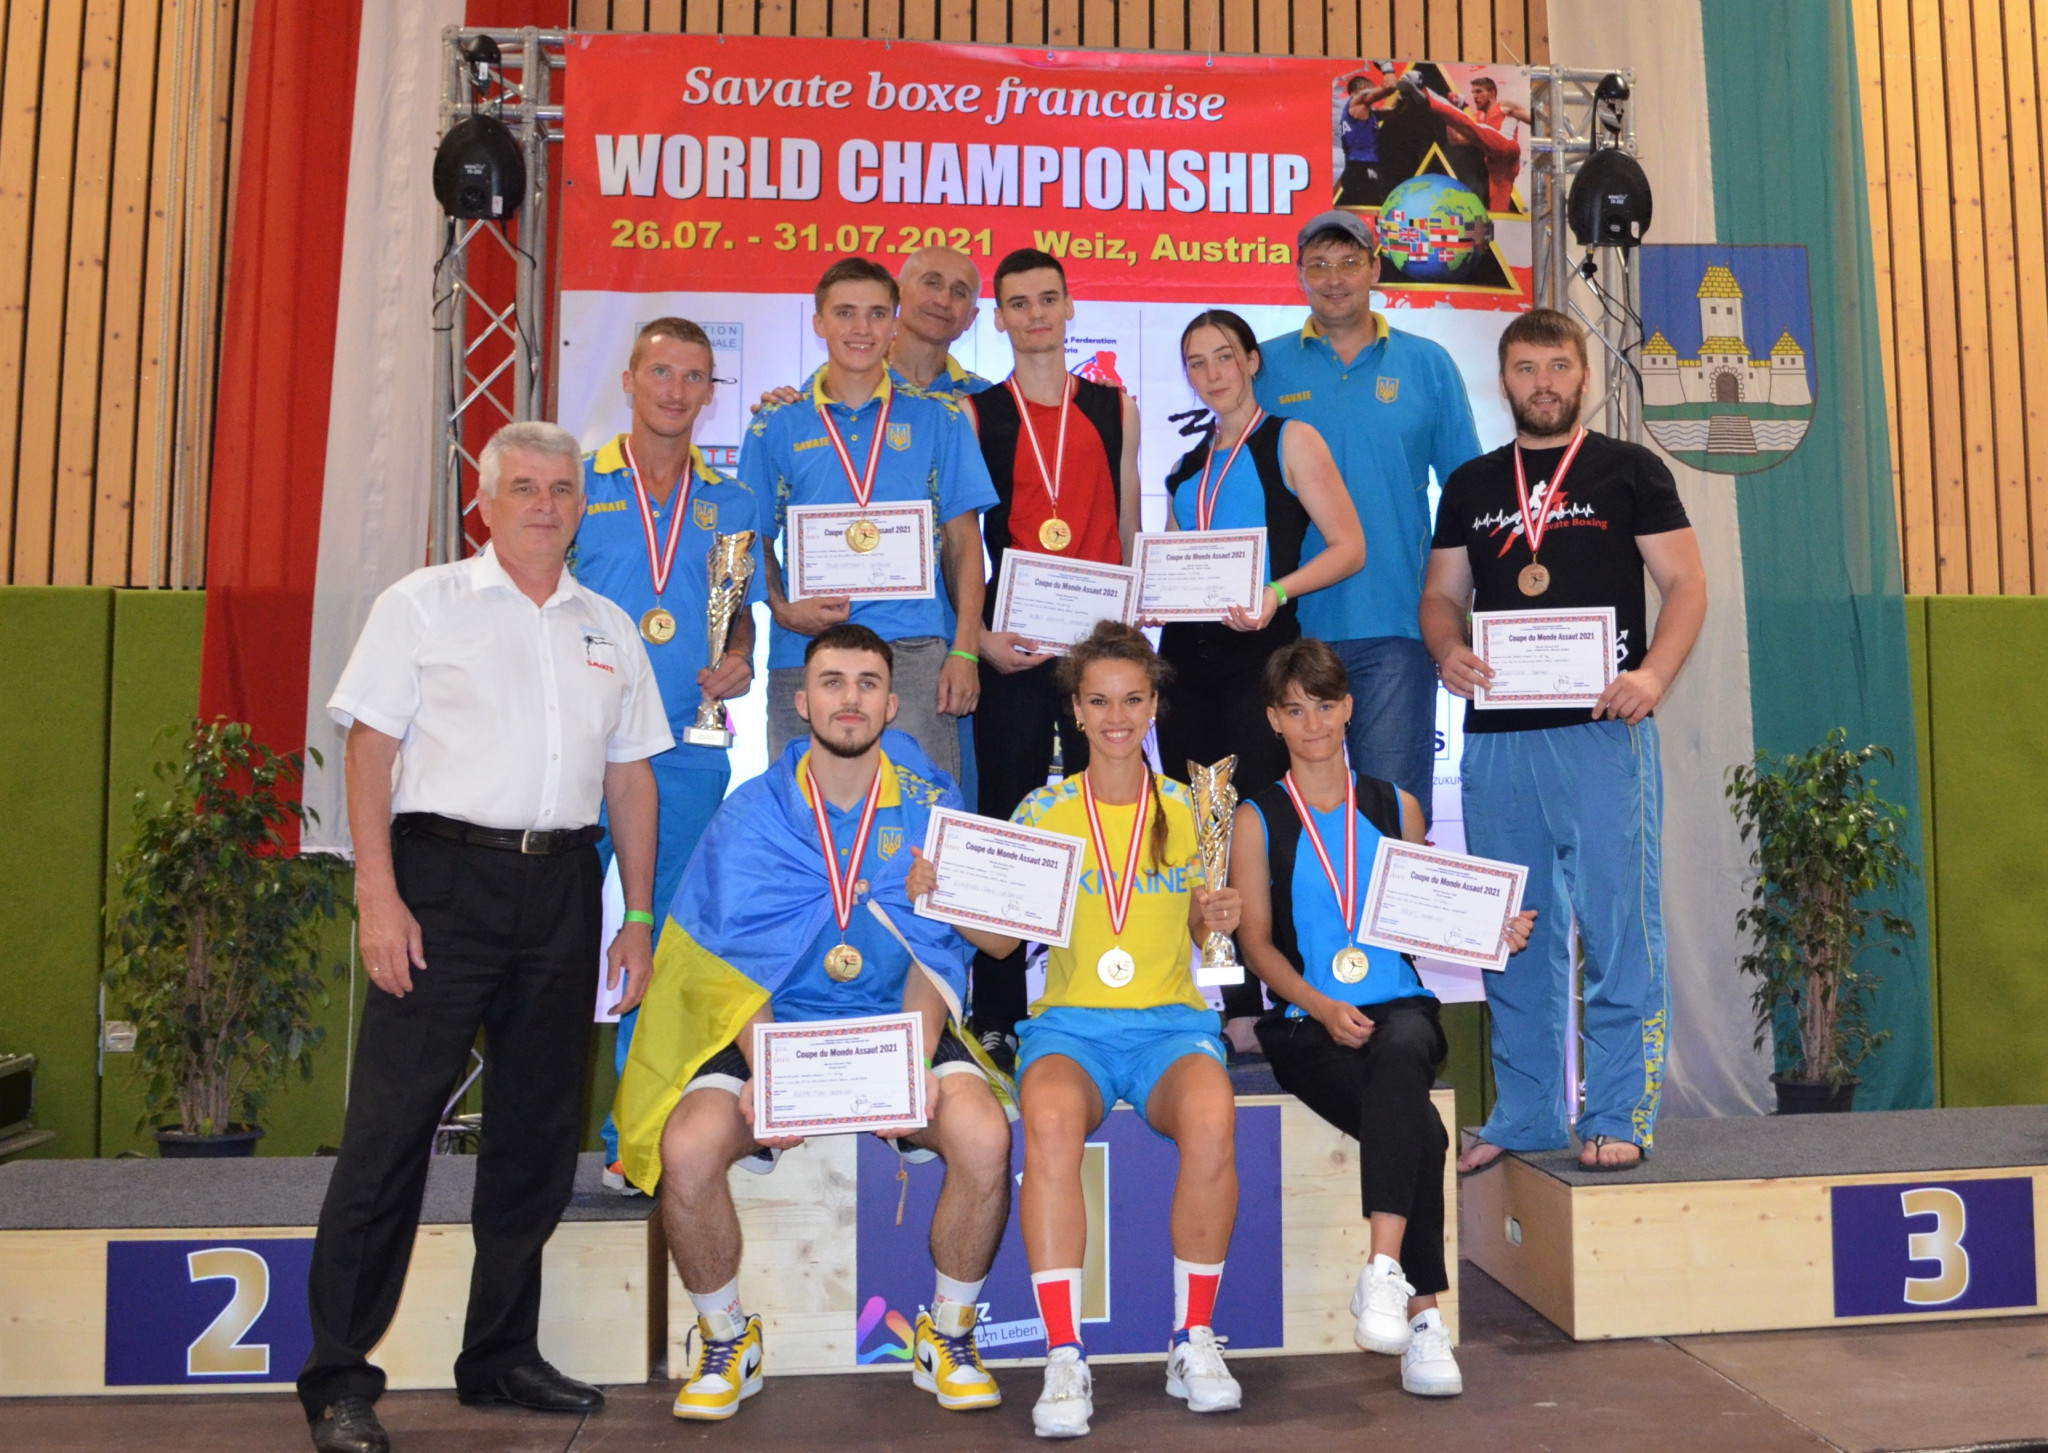 Ukraine also picked up a silver and bronze medal in addition to six golds ©FI Savate